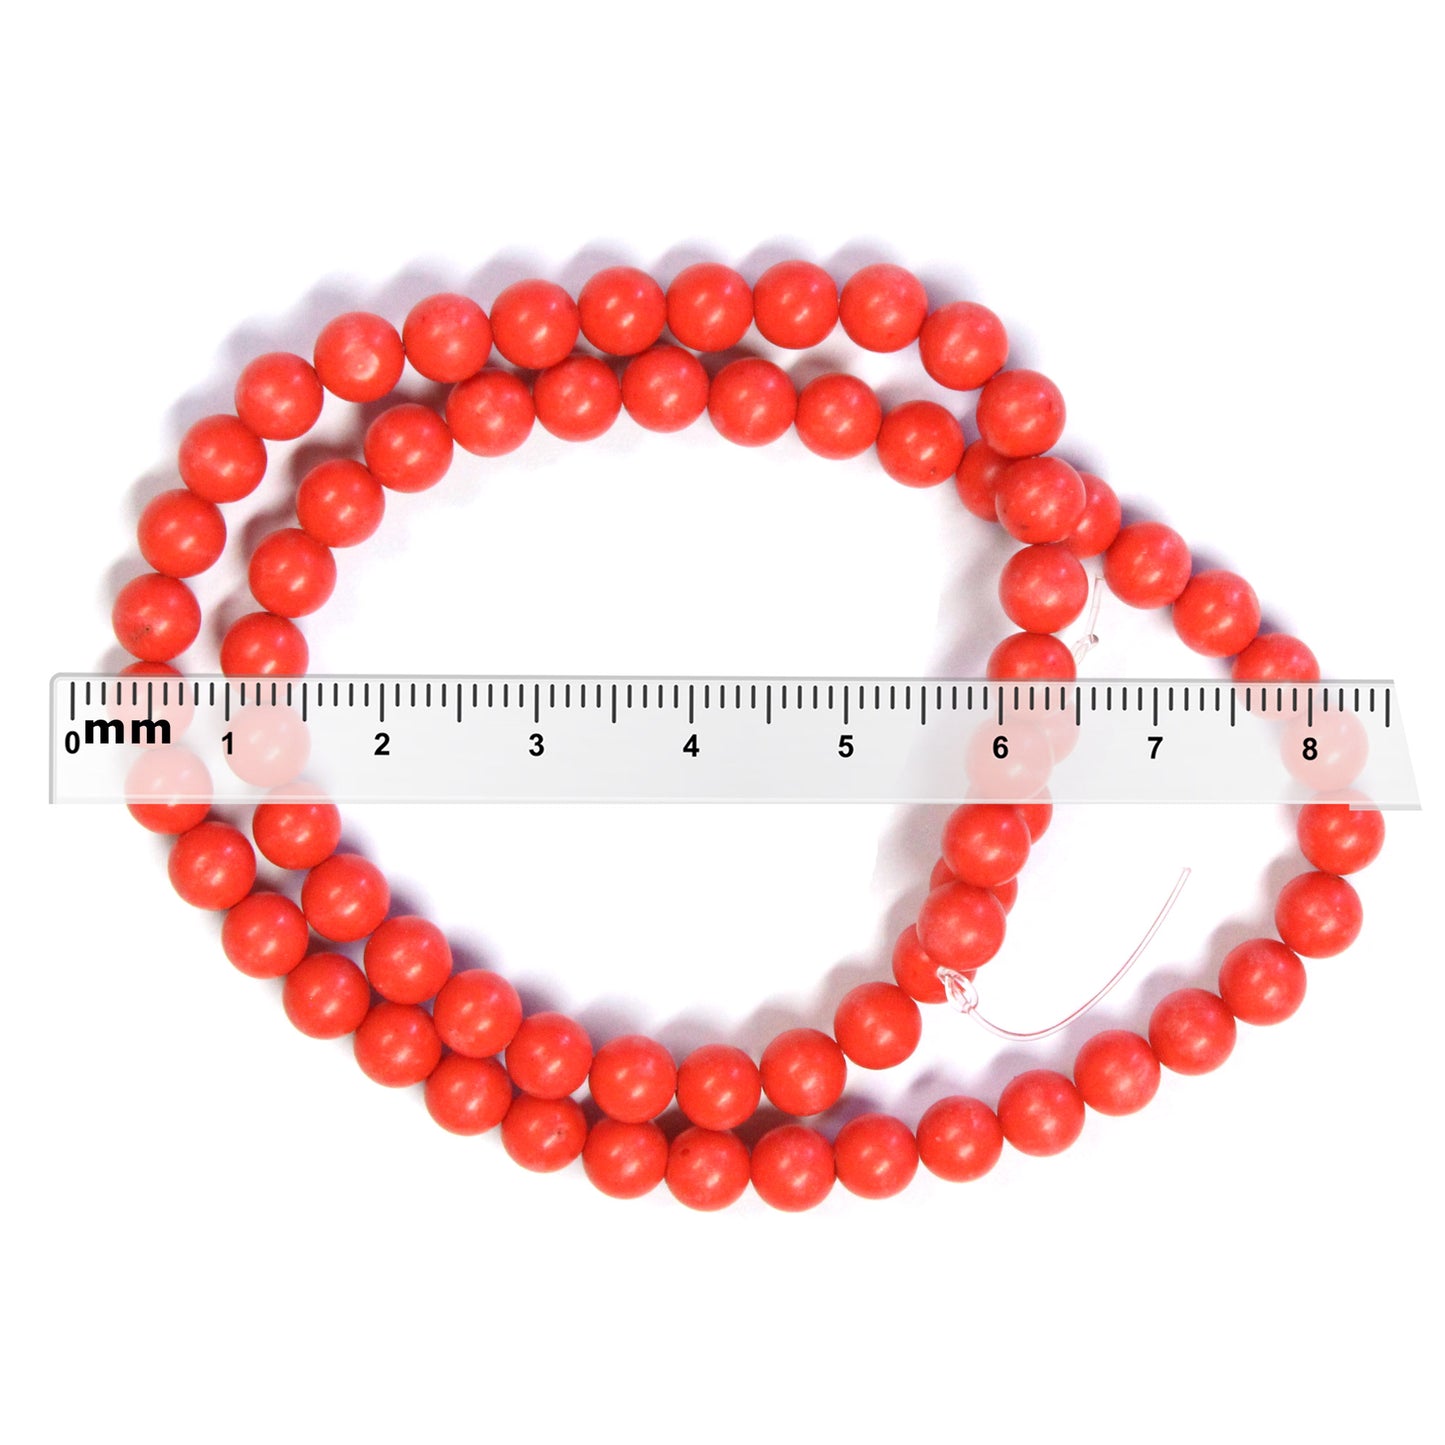 RED CORAL 6mm Round Beads / 16 Inch strand / man-made permanently dyed coral beads